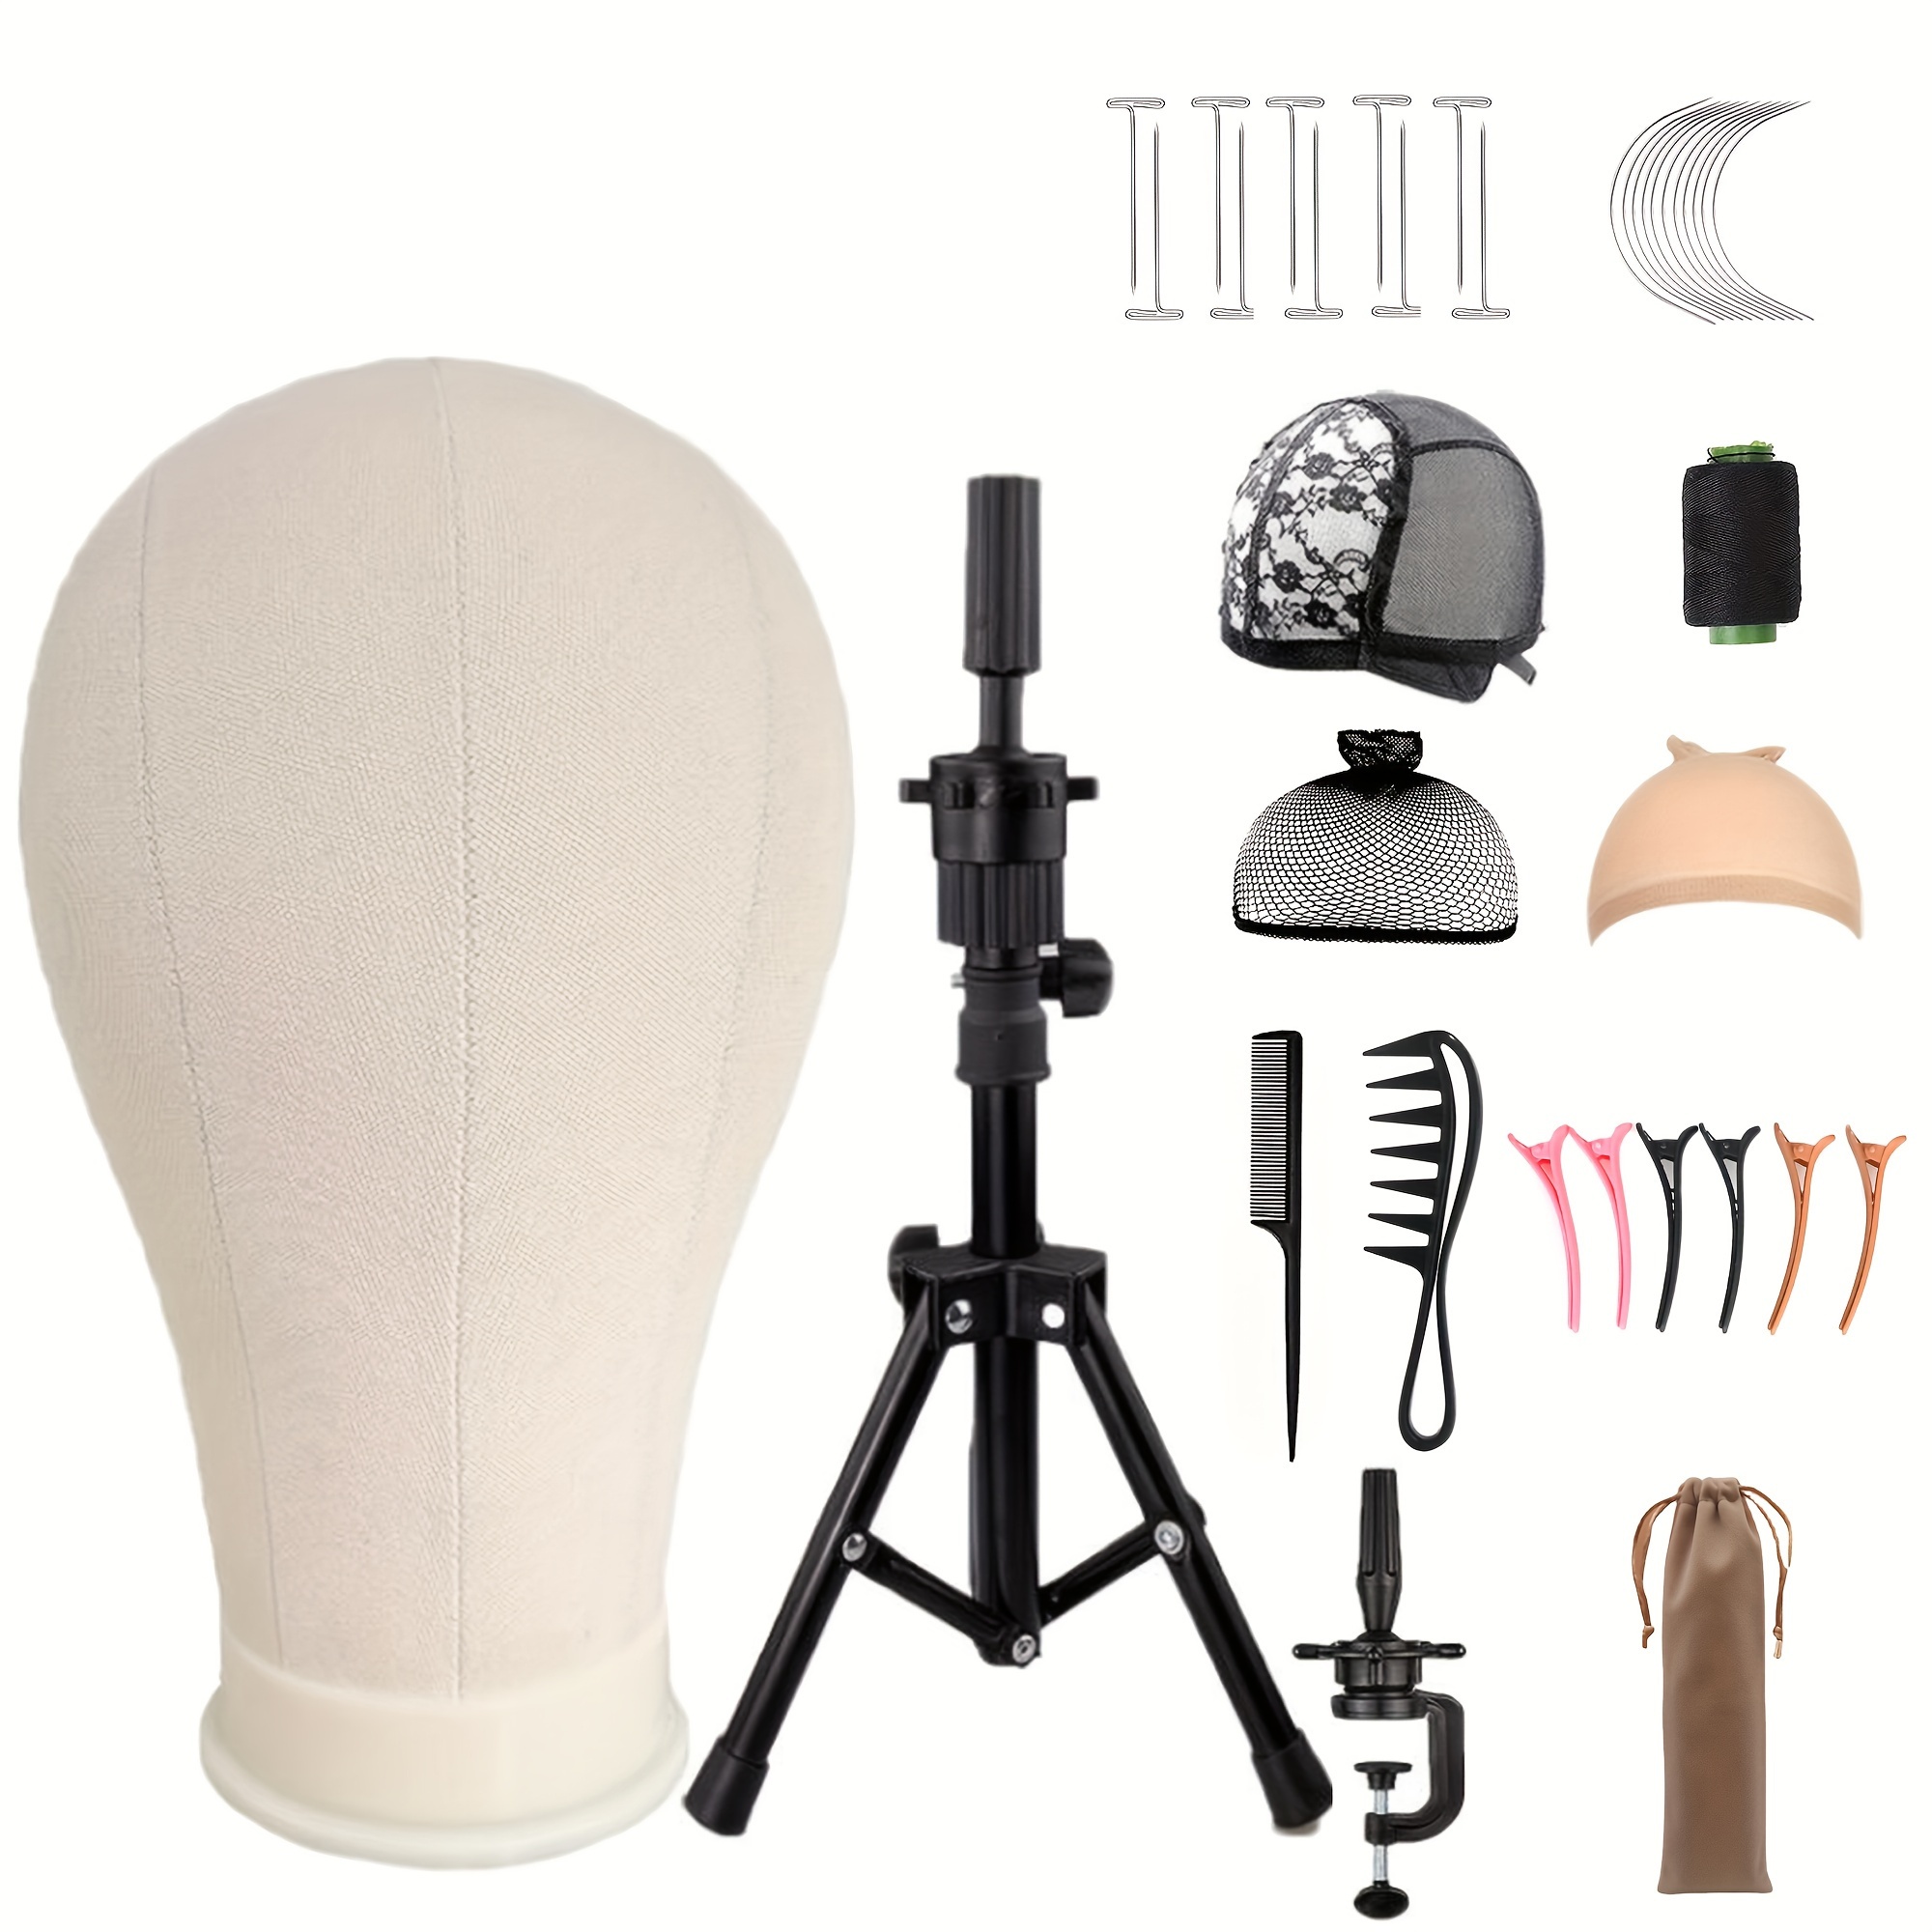 22 Inch Wig Head, Wig Stand Tripod With Head, Canvas Wig Head, Mannequin  Head For Wigs, Manikin Canvas Head Block Set For Wigs Making Display With  Wig